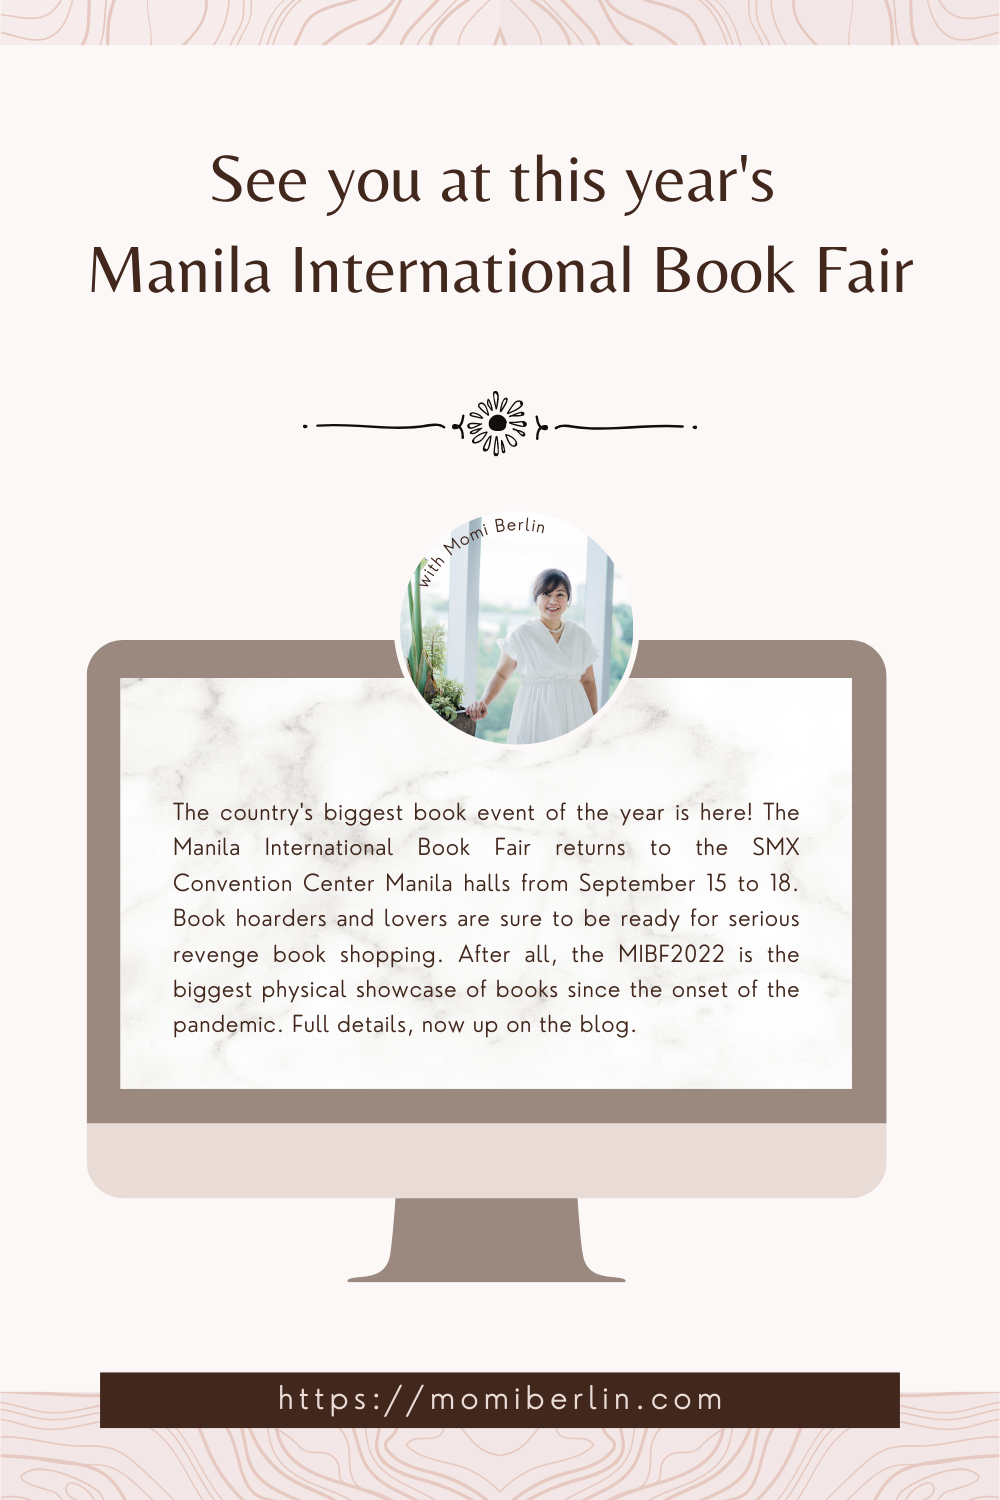 Top 5 reasons not to miss this year's MIBF